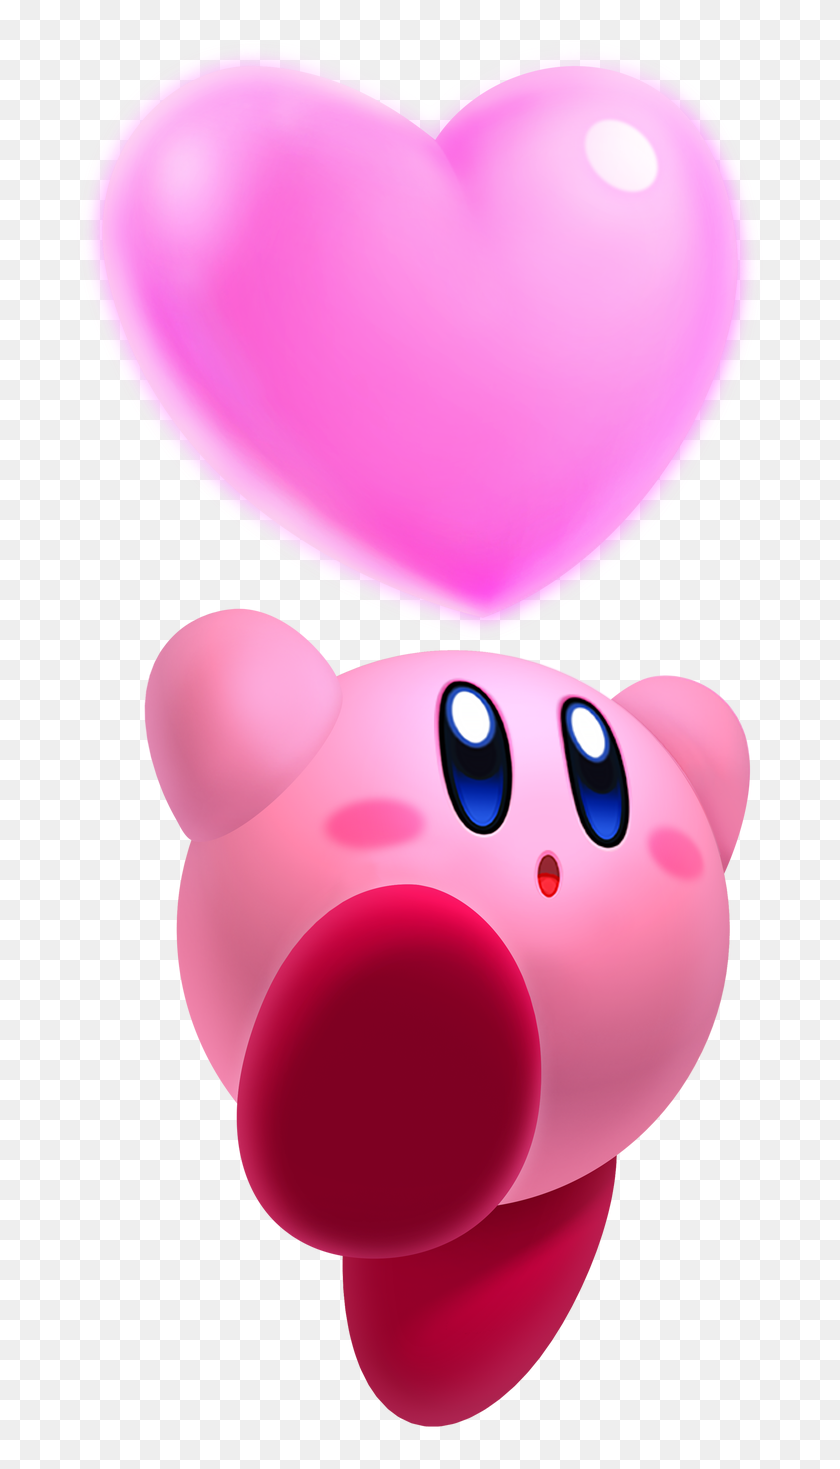 Kirby Star Allies Png Kirby Star Allies Render Transparent Png 780x1497 6894150 Pngfind